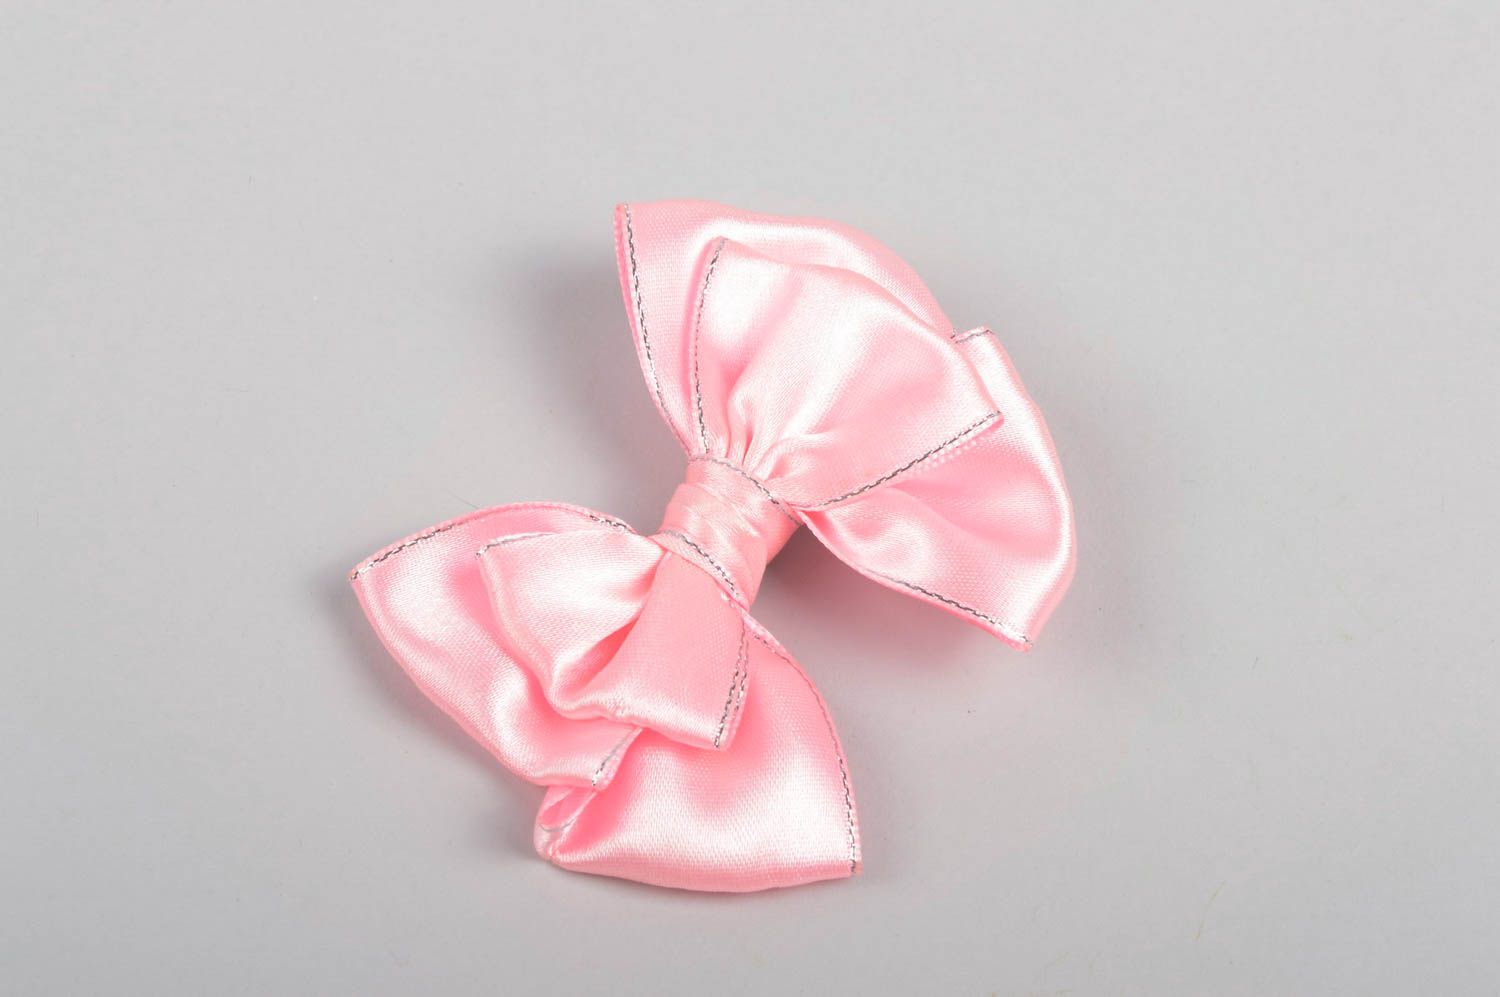 Handmade pink hair accessory hair bow made of ribbons hair bijouterie great gift photo 2